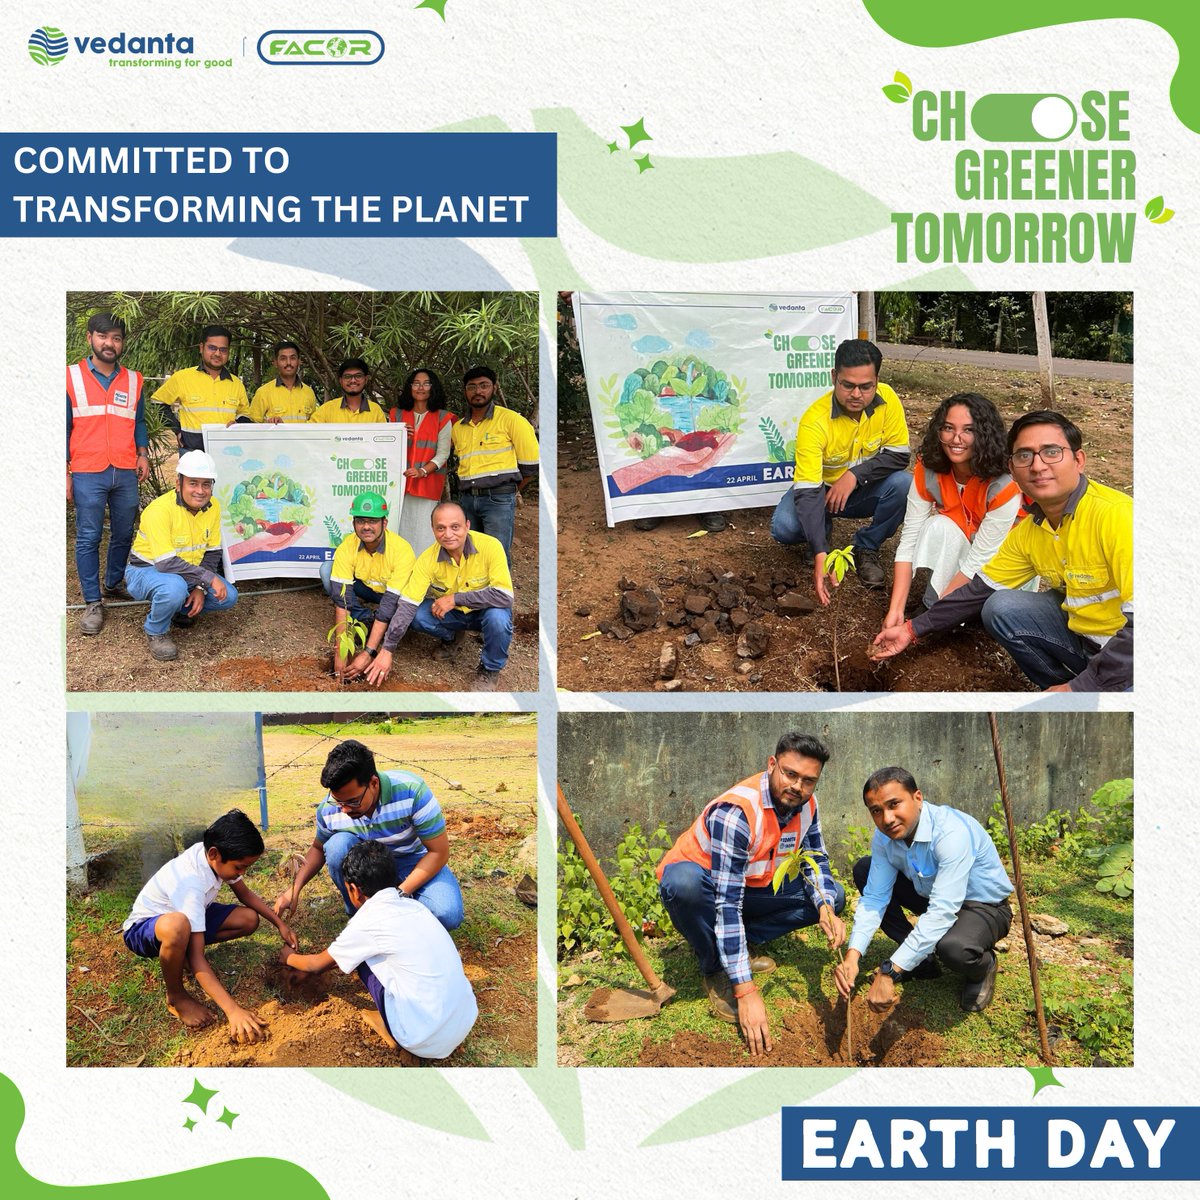 This #worldearthday, #FACOR reaffirms its dedication to #TransformingthePlanet and spearheading efforts toward a #bettertomorrow.  The celebrations were marked with #plantation drives across our plant and mine locations, and drawing competition on Earth Day. #transformingforgood